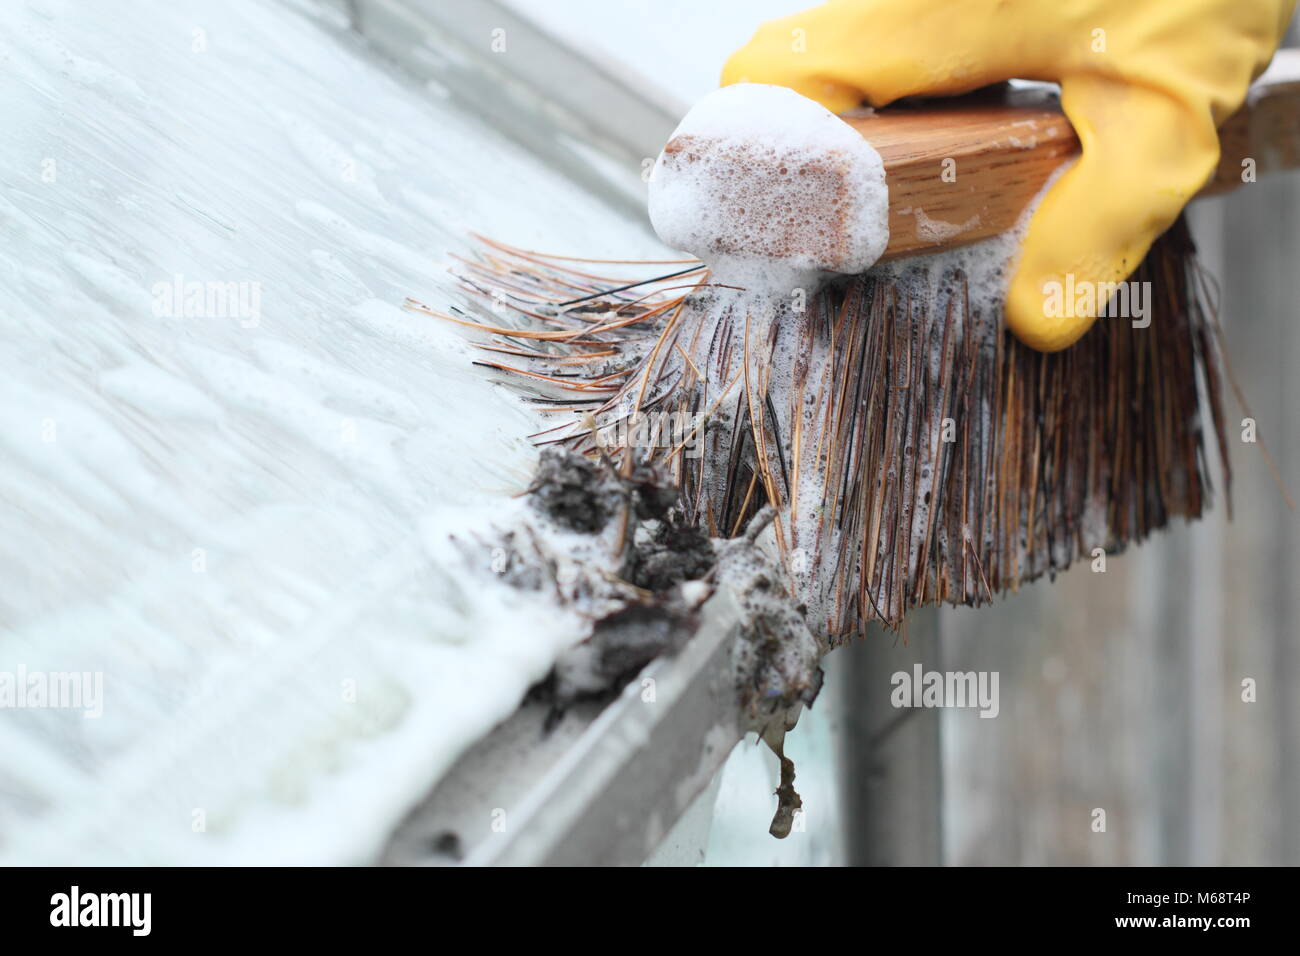 Greenhouse gutters are cleared of grime and windows washed down with warm soapy water to prepare for new growing season in a garden, UK Stock Photo